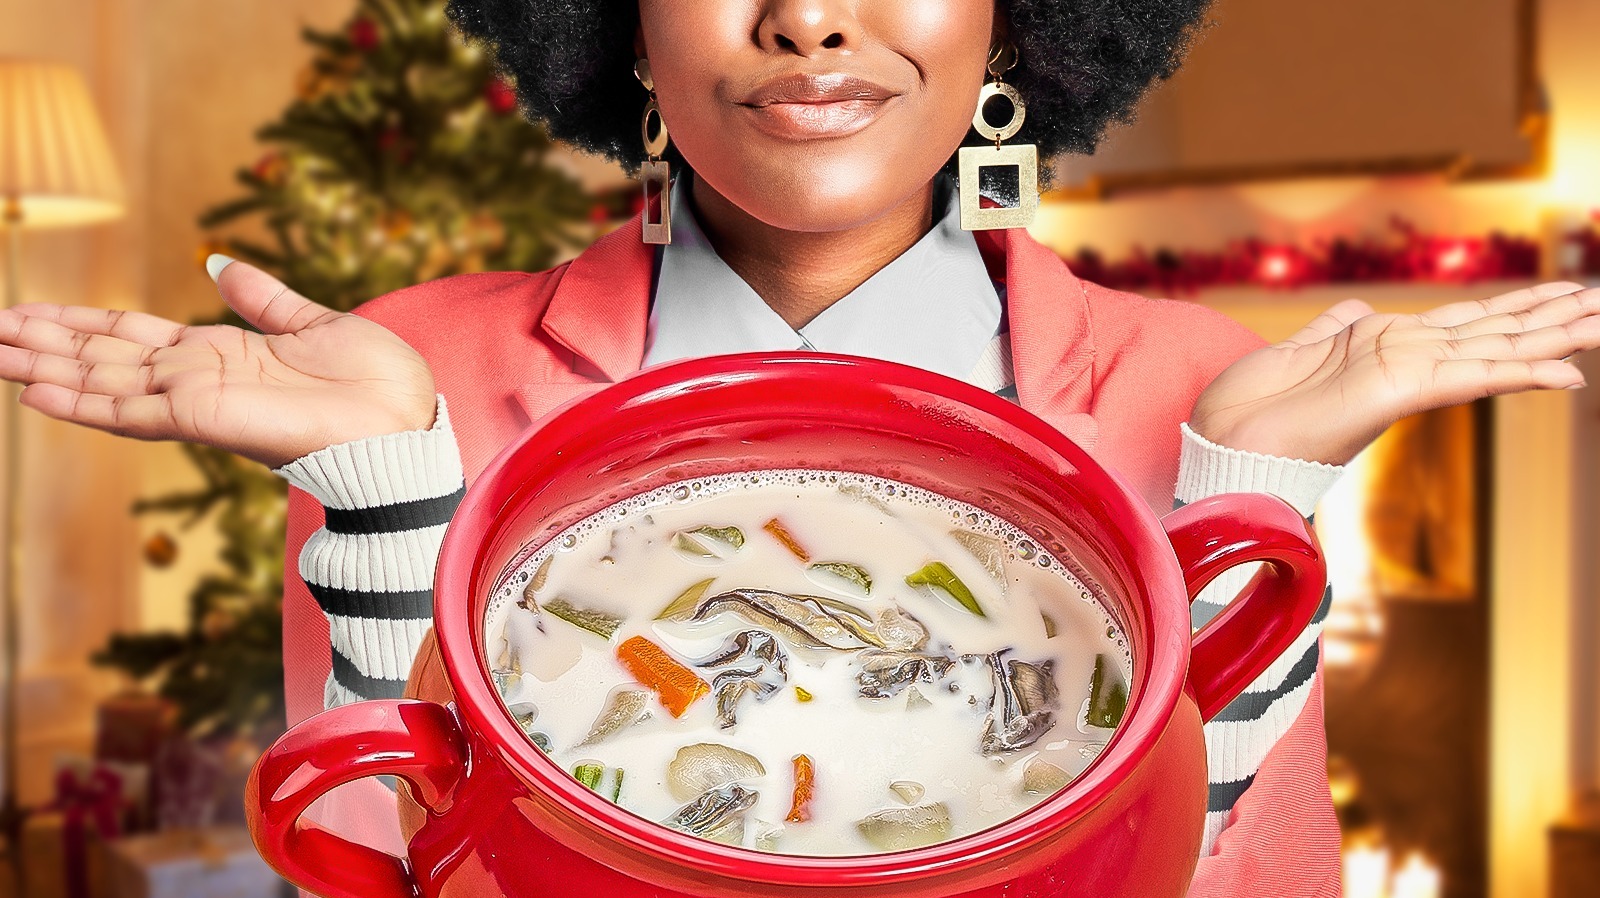 https://www.tastingtable.com/img/gallery/why-oyster-stew-is-eaten-on-christmas-eve-upgrade/l-intro-1699908008.jpg